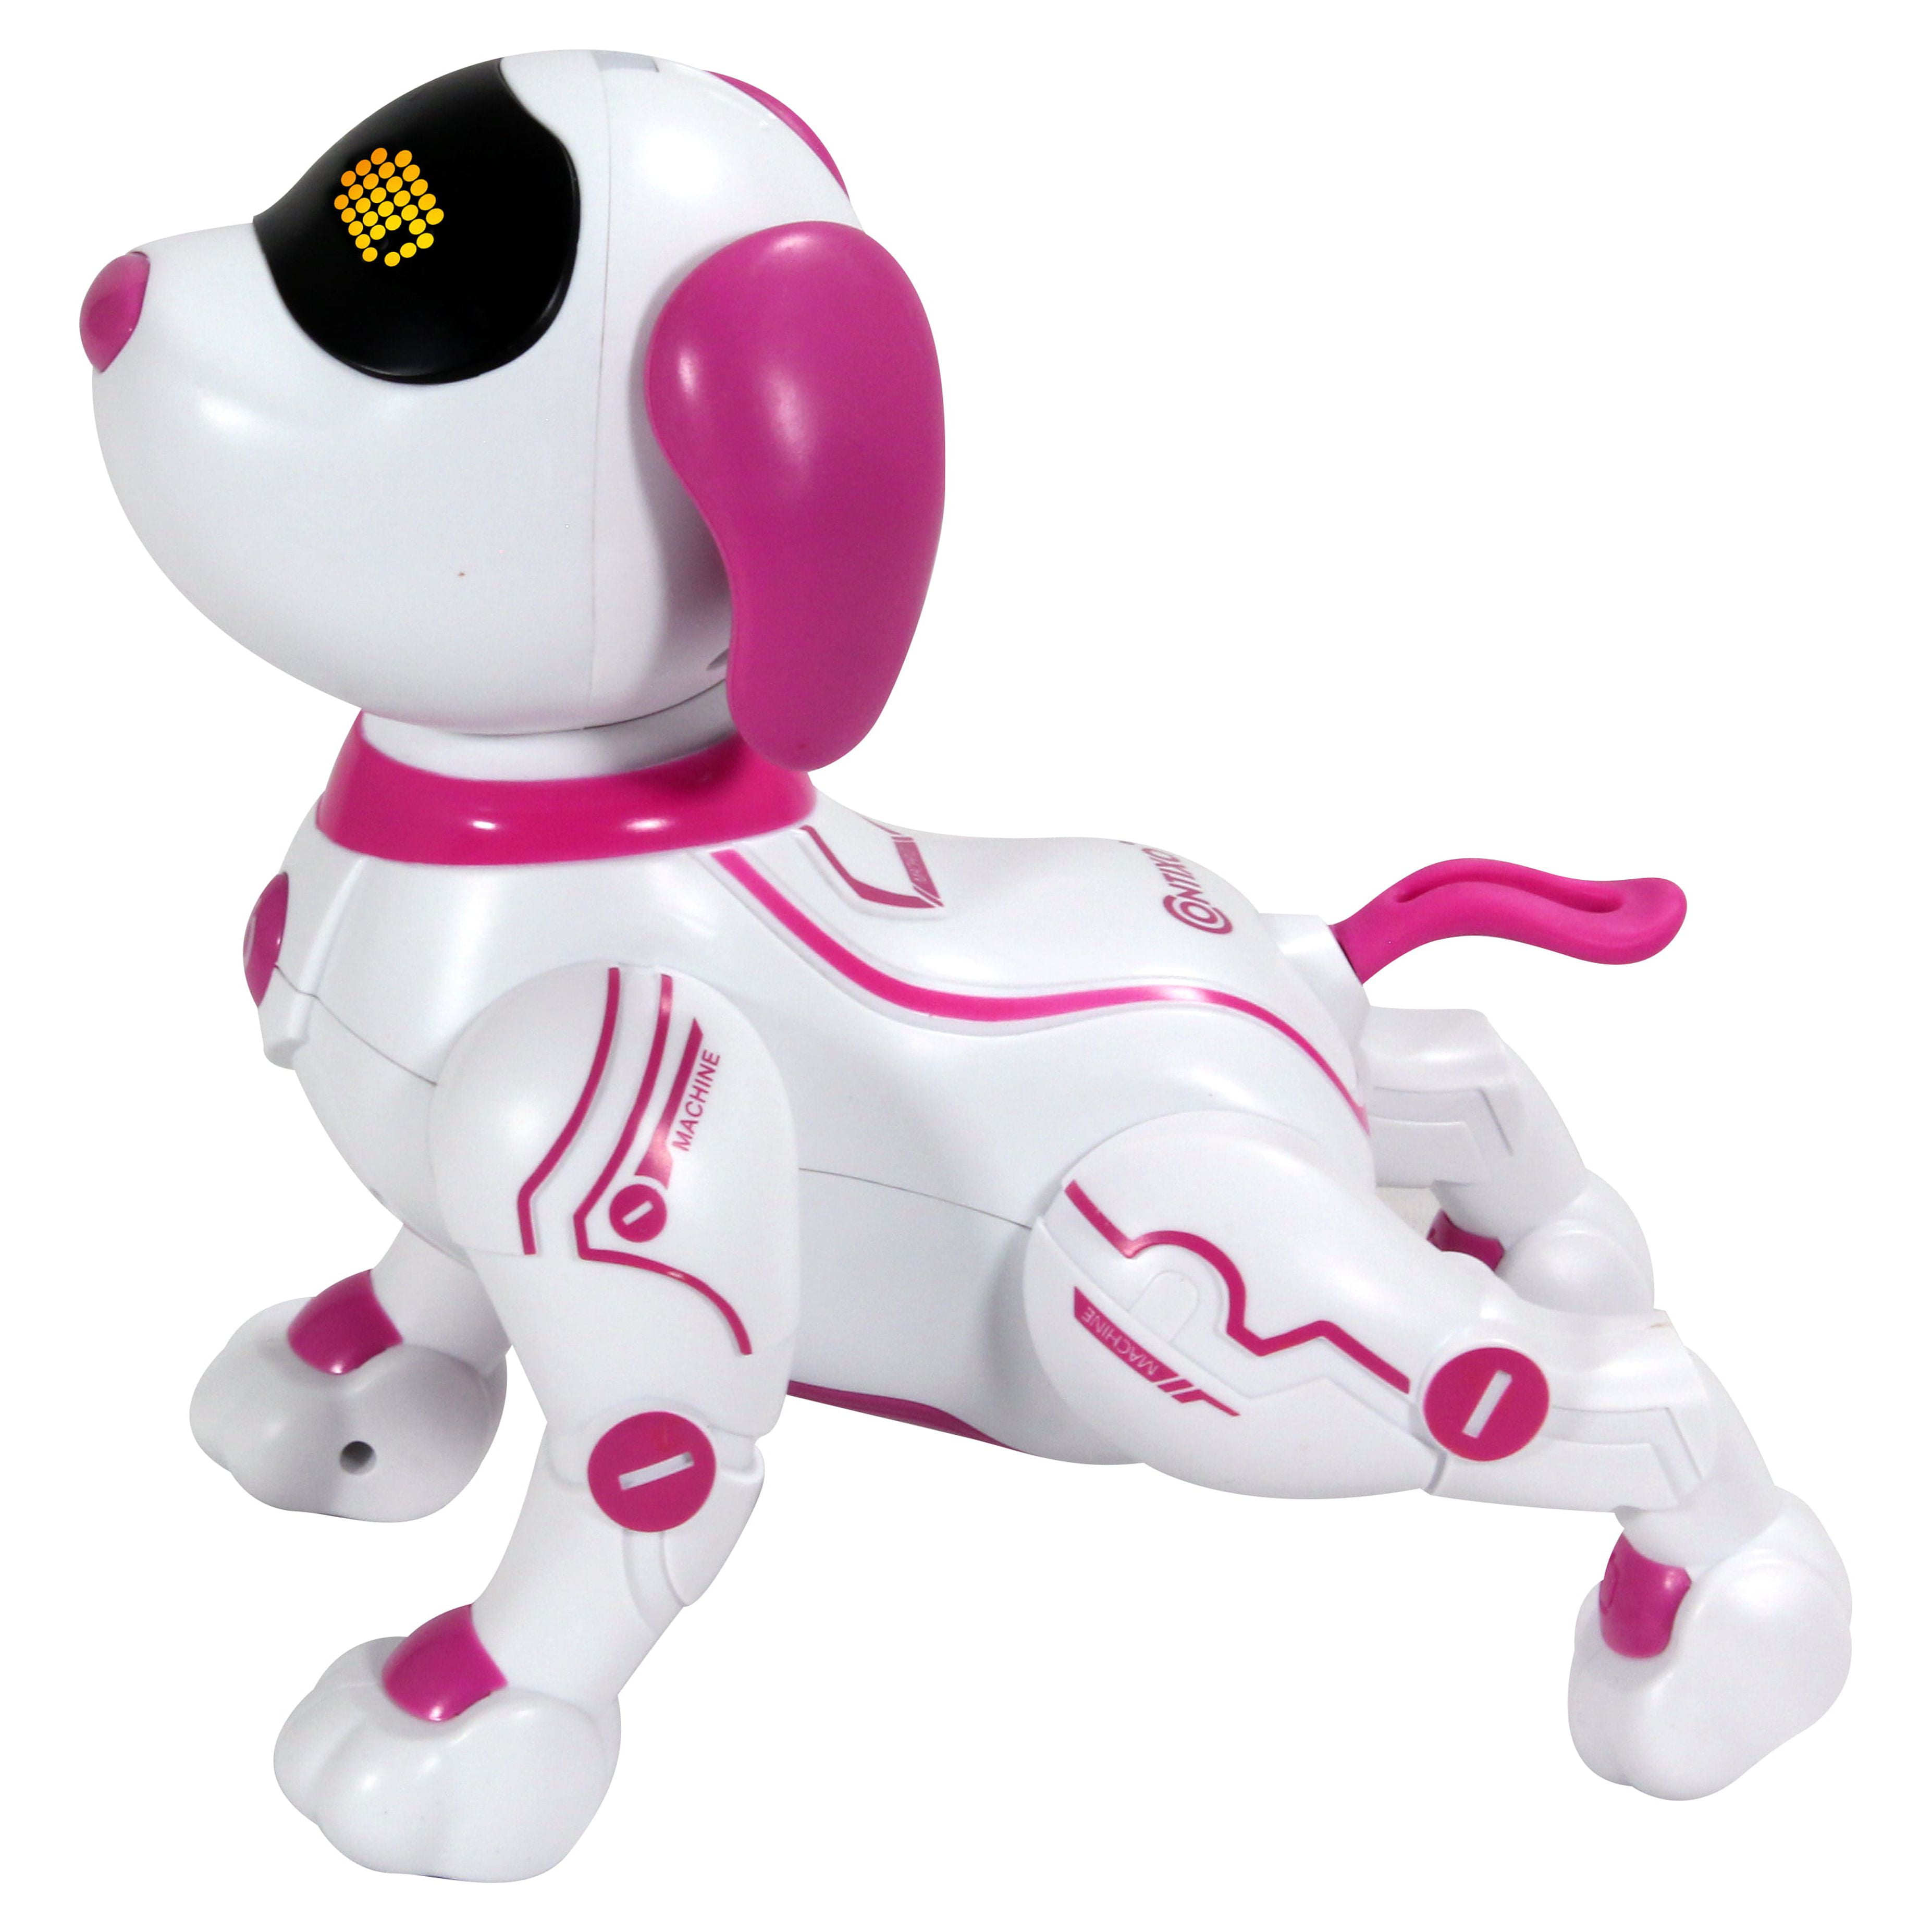 Contixo R3 Robot Dog, Walking Pet Robot Toy, App Controlled Robots for Kids,  Remote Control, Interactive Dance, Voice Commands, Bluetooth, Motion  Sensor, RC Toy Dog 